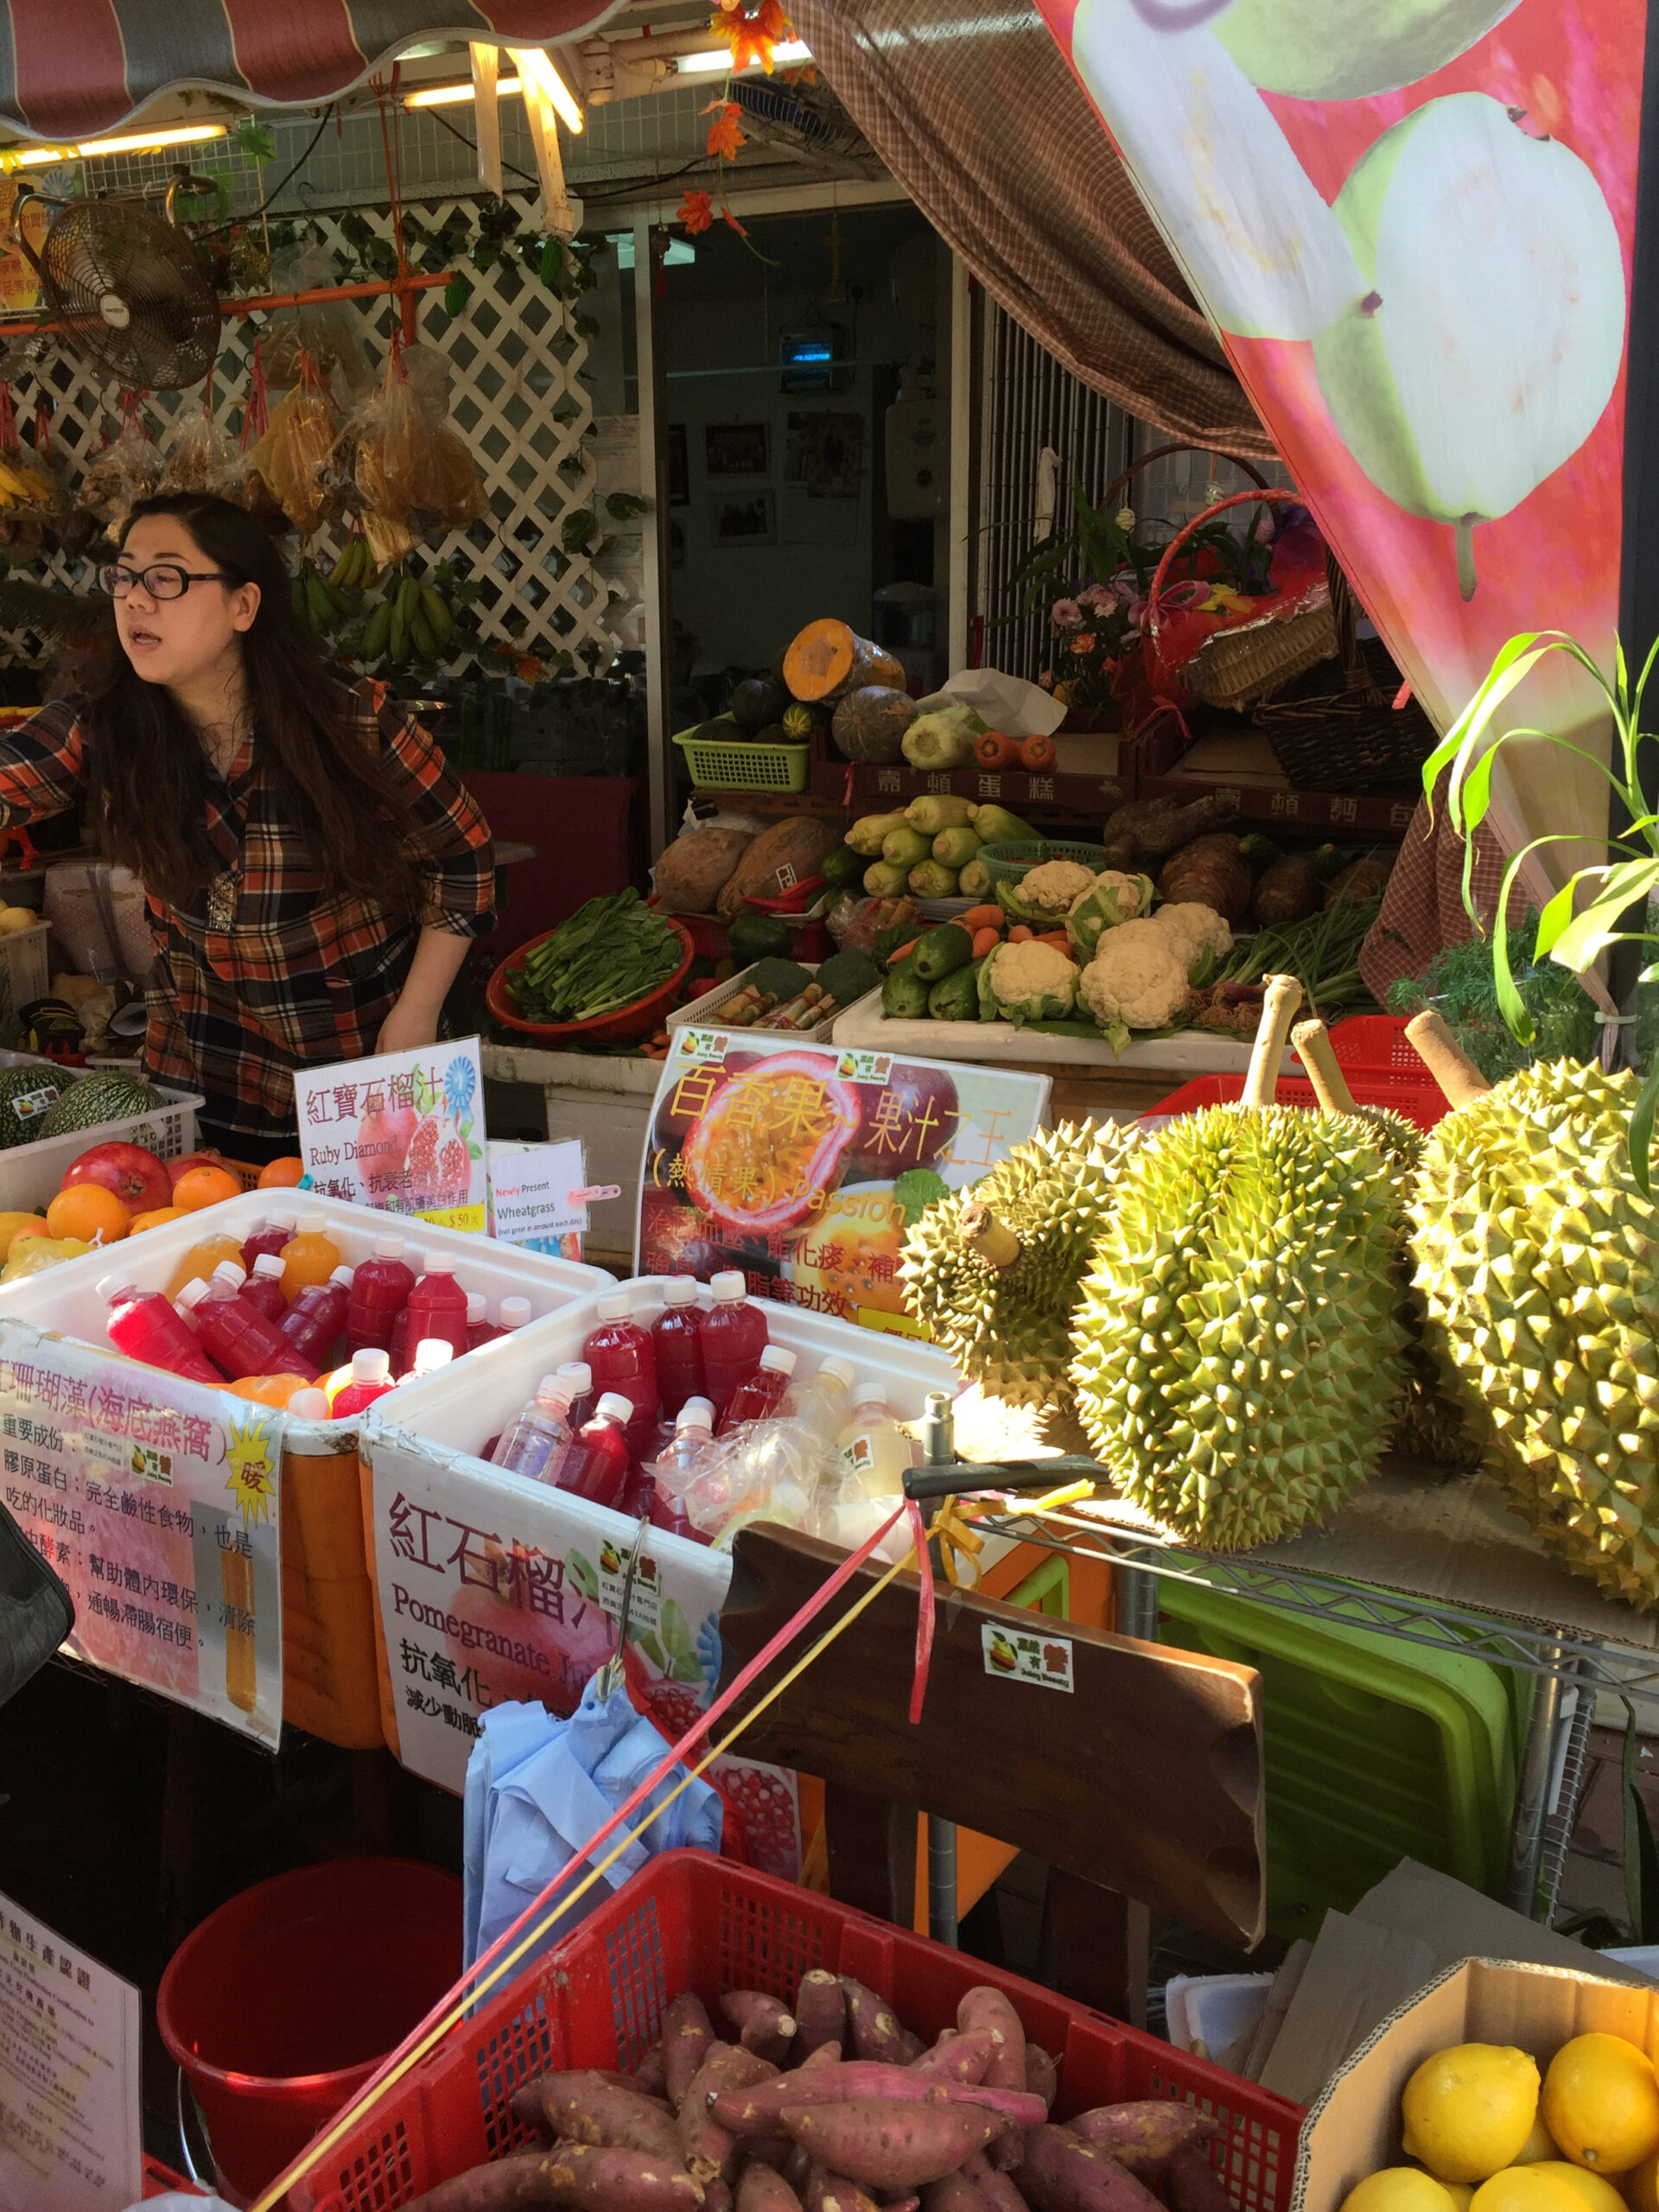 Thailand market girl selling durian and other fruit